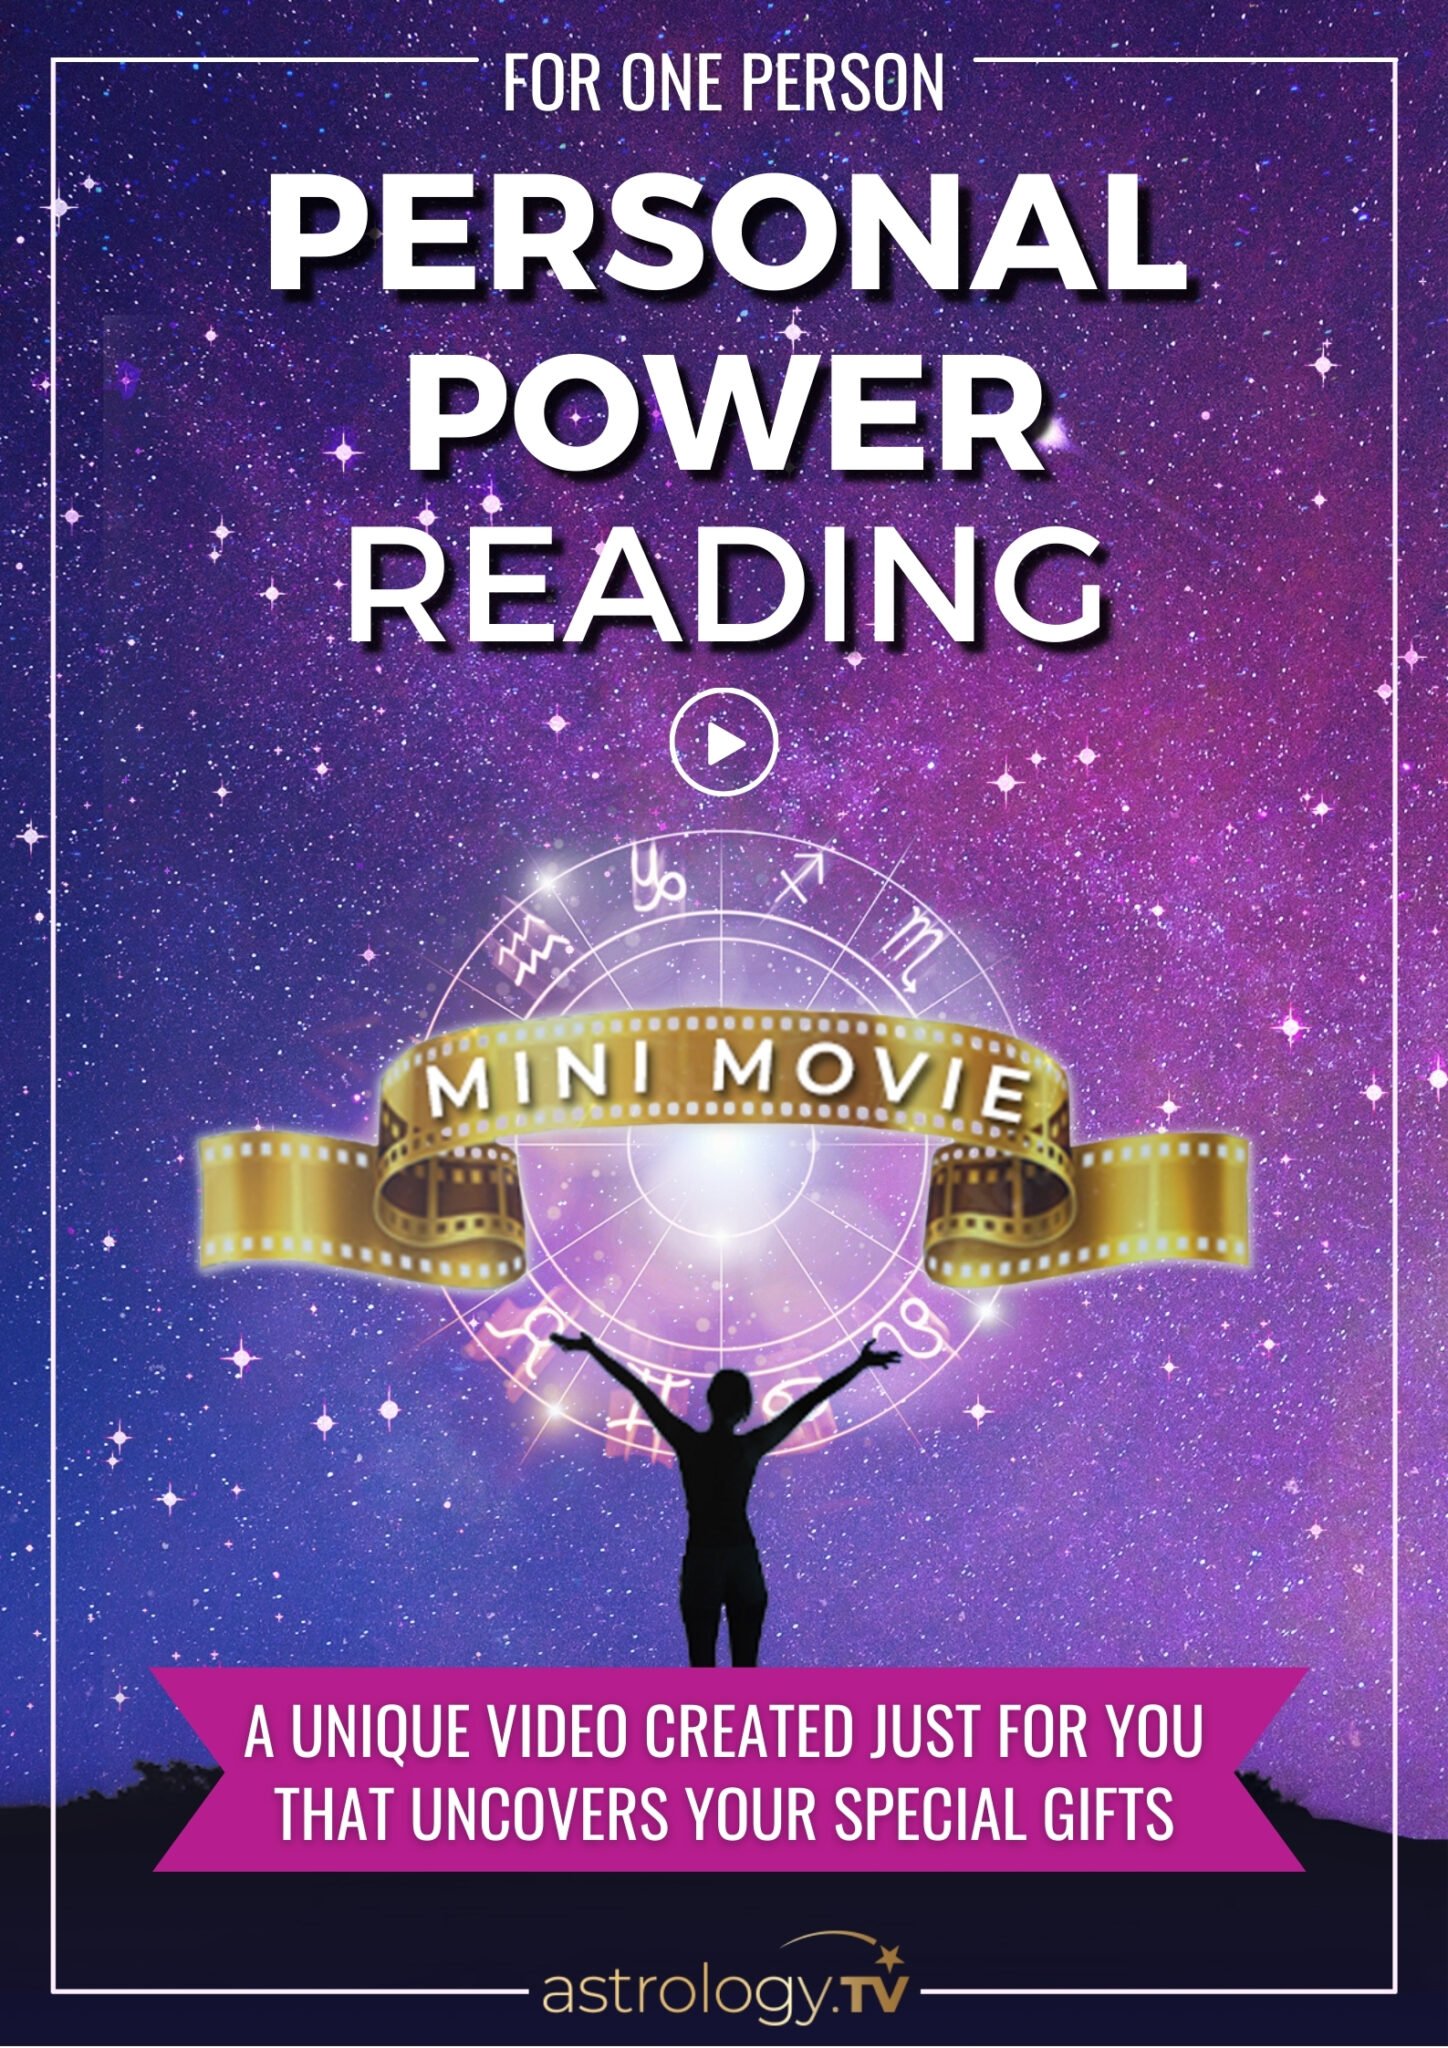 Personal Power Reading Mini Movie by Astrology.TV